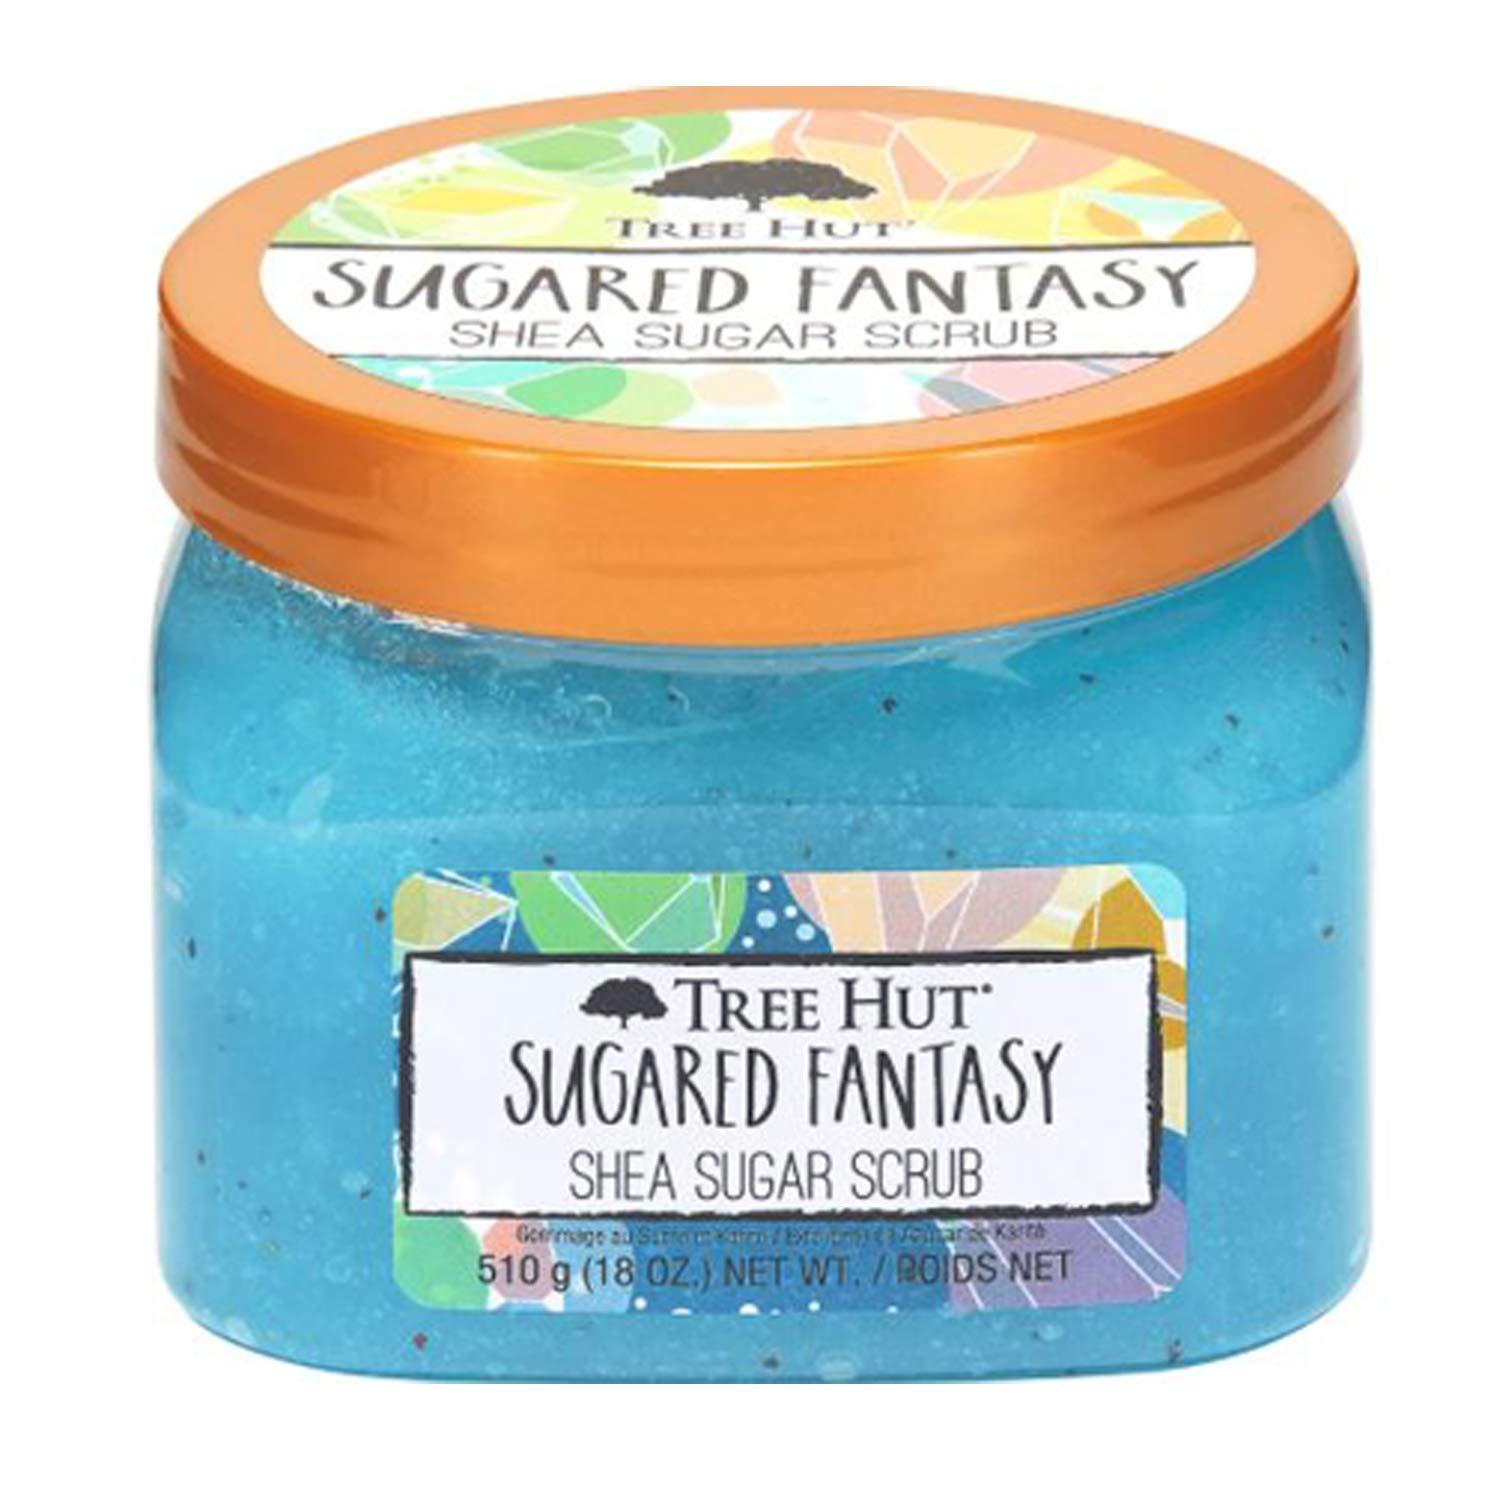 TREE HUT Sugared Fantasy Shea Sugar Scrub 18 Oz Formulated With Real Sugar  Certified Shea Butter And Blueberry Extract Exfoliating Body Scrub That  Leaves Skin Feeling Soft Smooth (Sugared Fantasy)